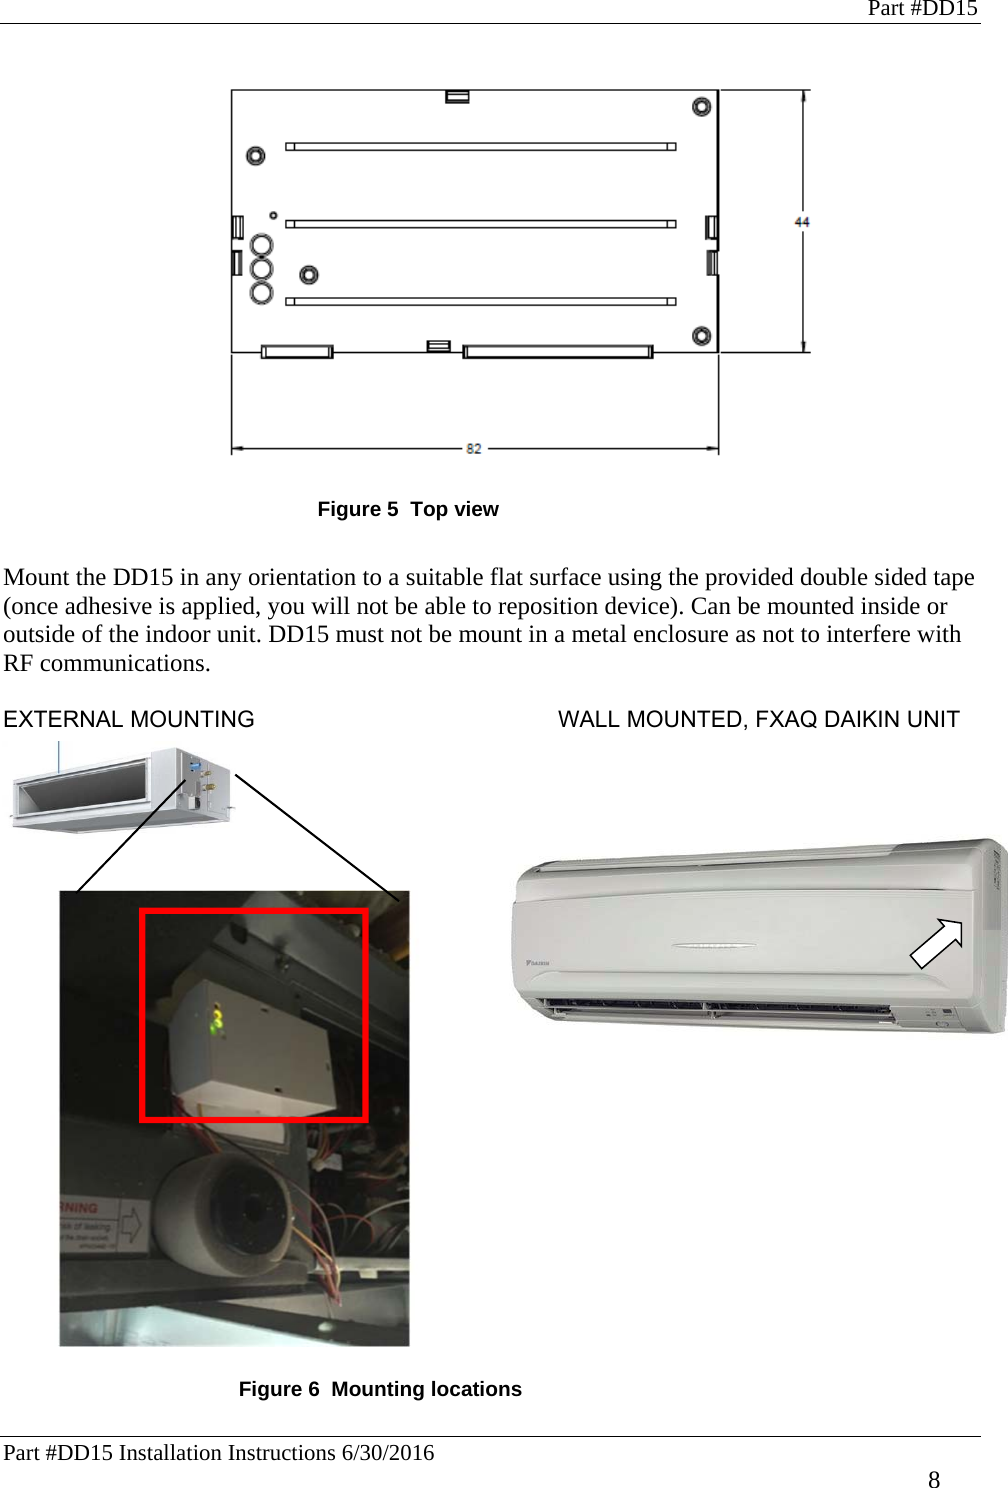 Part #DD15 Part #DD15 Installation Instructions 6/30/2016     8  Figure 5  Top view  Mount the DD15 in any orientation to a suitable flat surface using the provided double sided tape (once adhesive is applied, you will not be able to reposition device). Can be mounted inside or outside of the indoor unit. DD15 must not be mount in a metal enclosure as not to interfere with RF communications.   EXTERNAL MOUNTING                     WALL MOUNTED, FXAQ DAIKIN UNIT                        Example of mounting        Figure 6  Mounting locations 